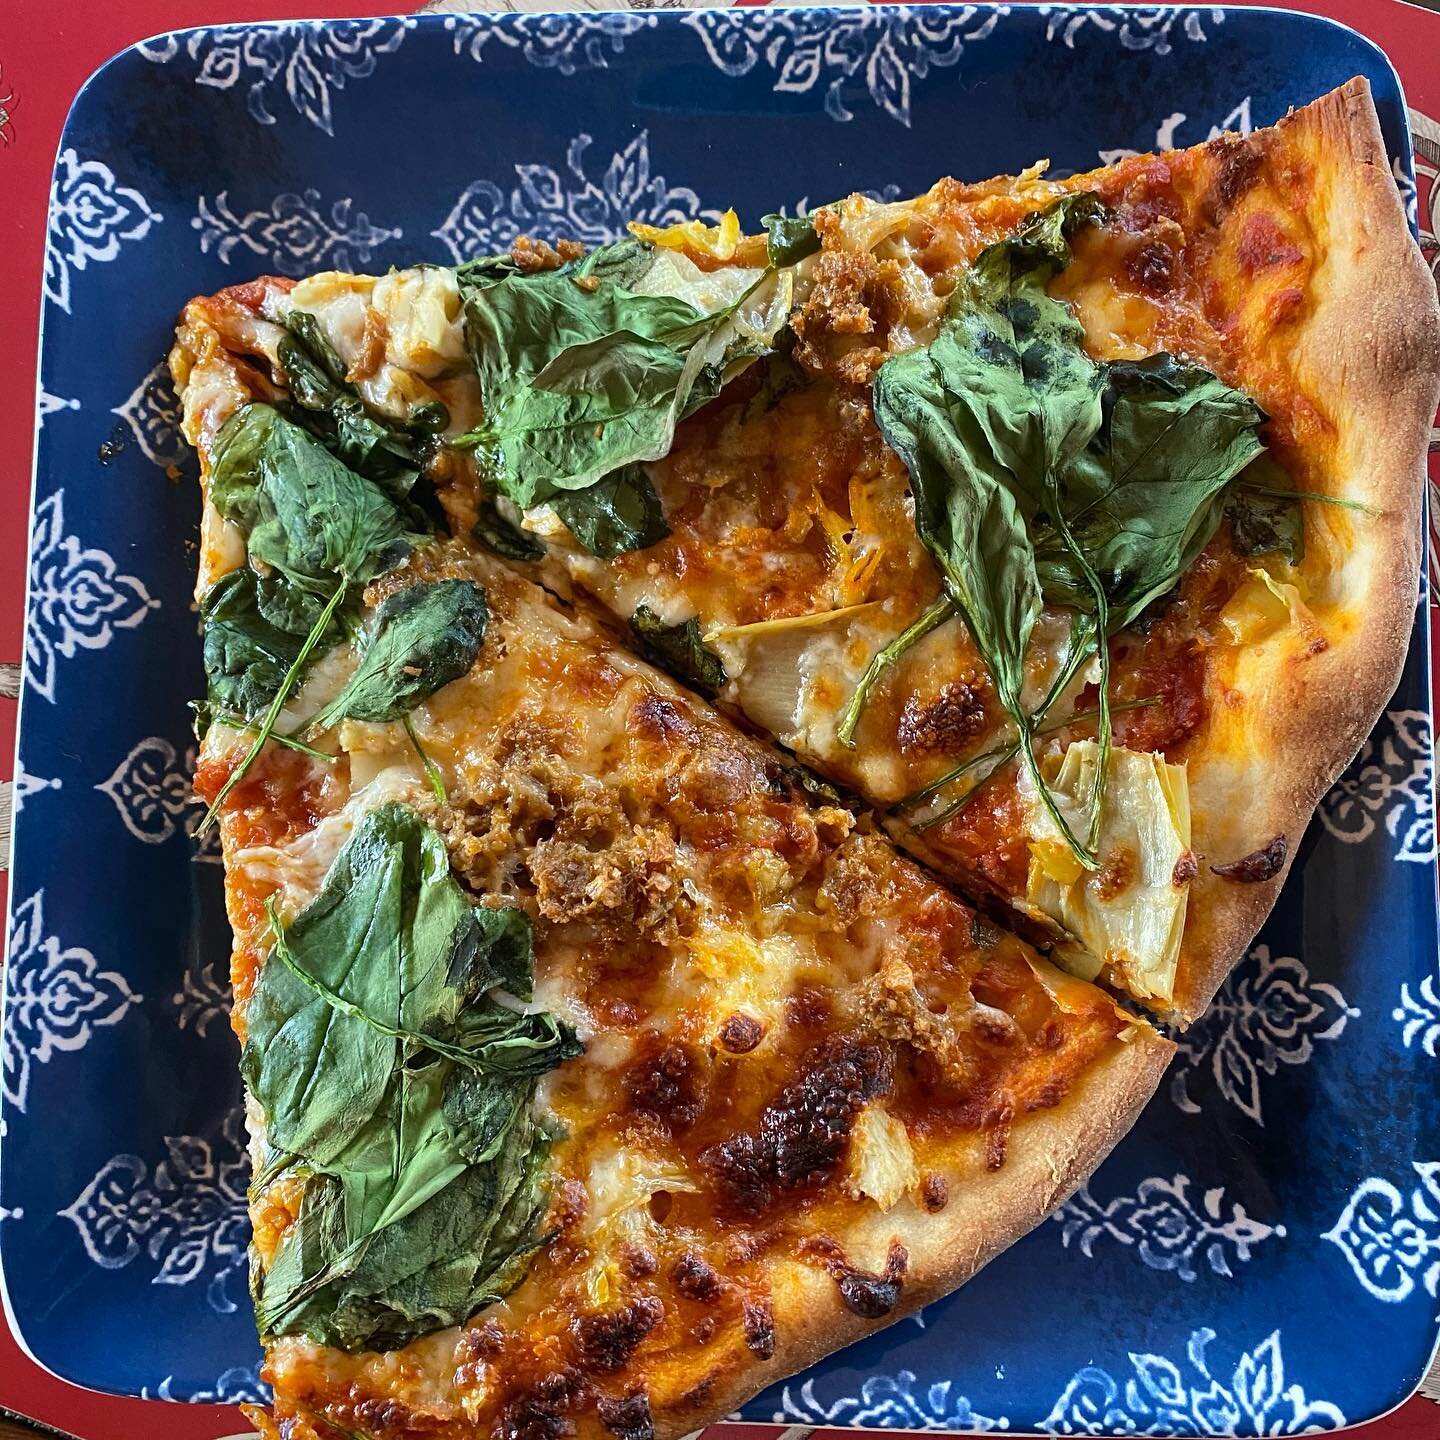 Pizza party [part whole wheat crust with artichoke, pepperocini, spinach, @beyondmeat sausage, spinach, mozz, parm, tomato sauce]
.
.
Mix 2 1/4 tsp (1 packet) instant yeast with 1 tablespoon sugar and 1 and 1/3 warm water (around it 100 degrees, what